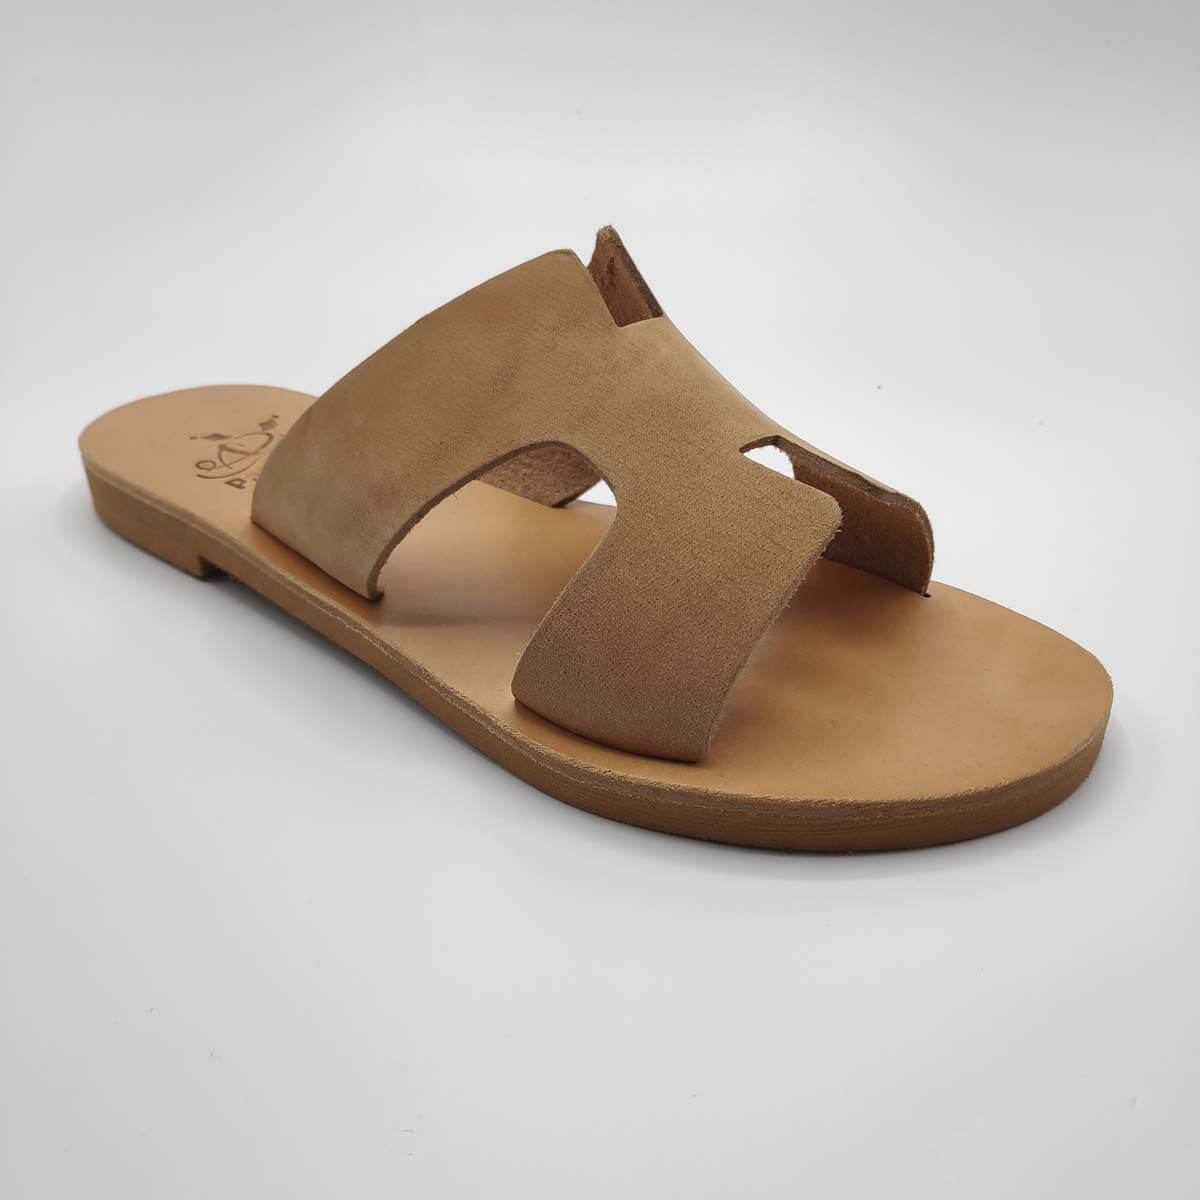 Hermes Slippers Women Leather Sandal - Leather Sandals | Pagonis Greek  Sandals